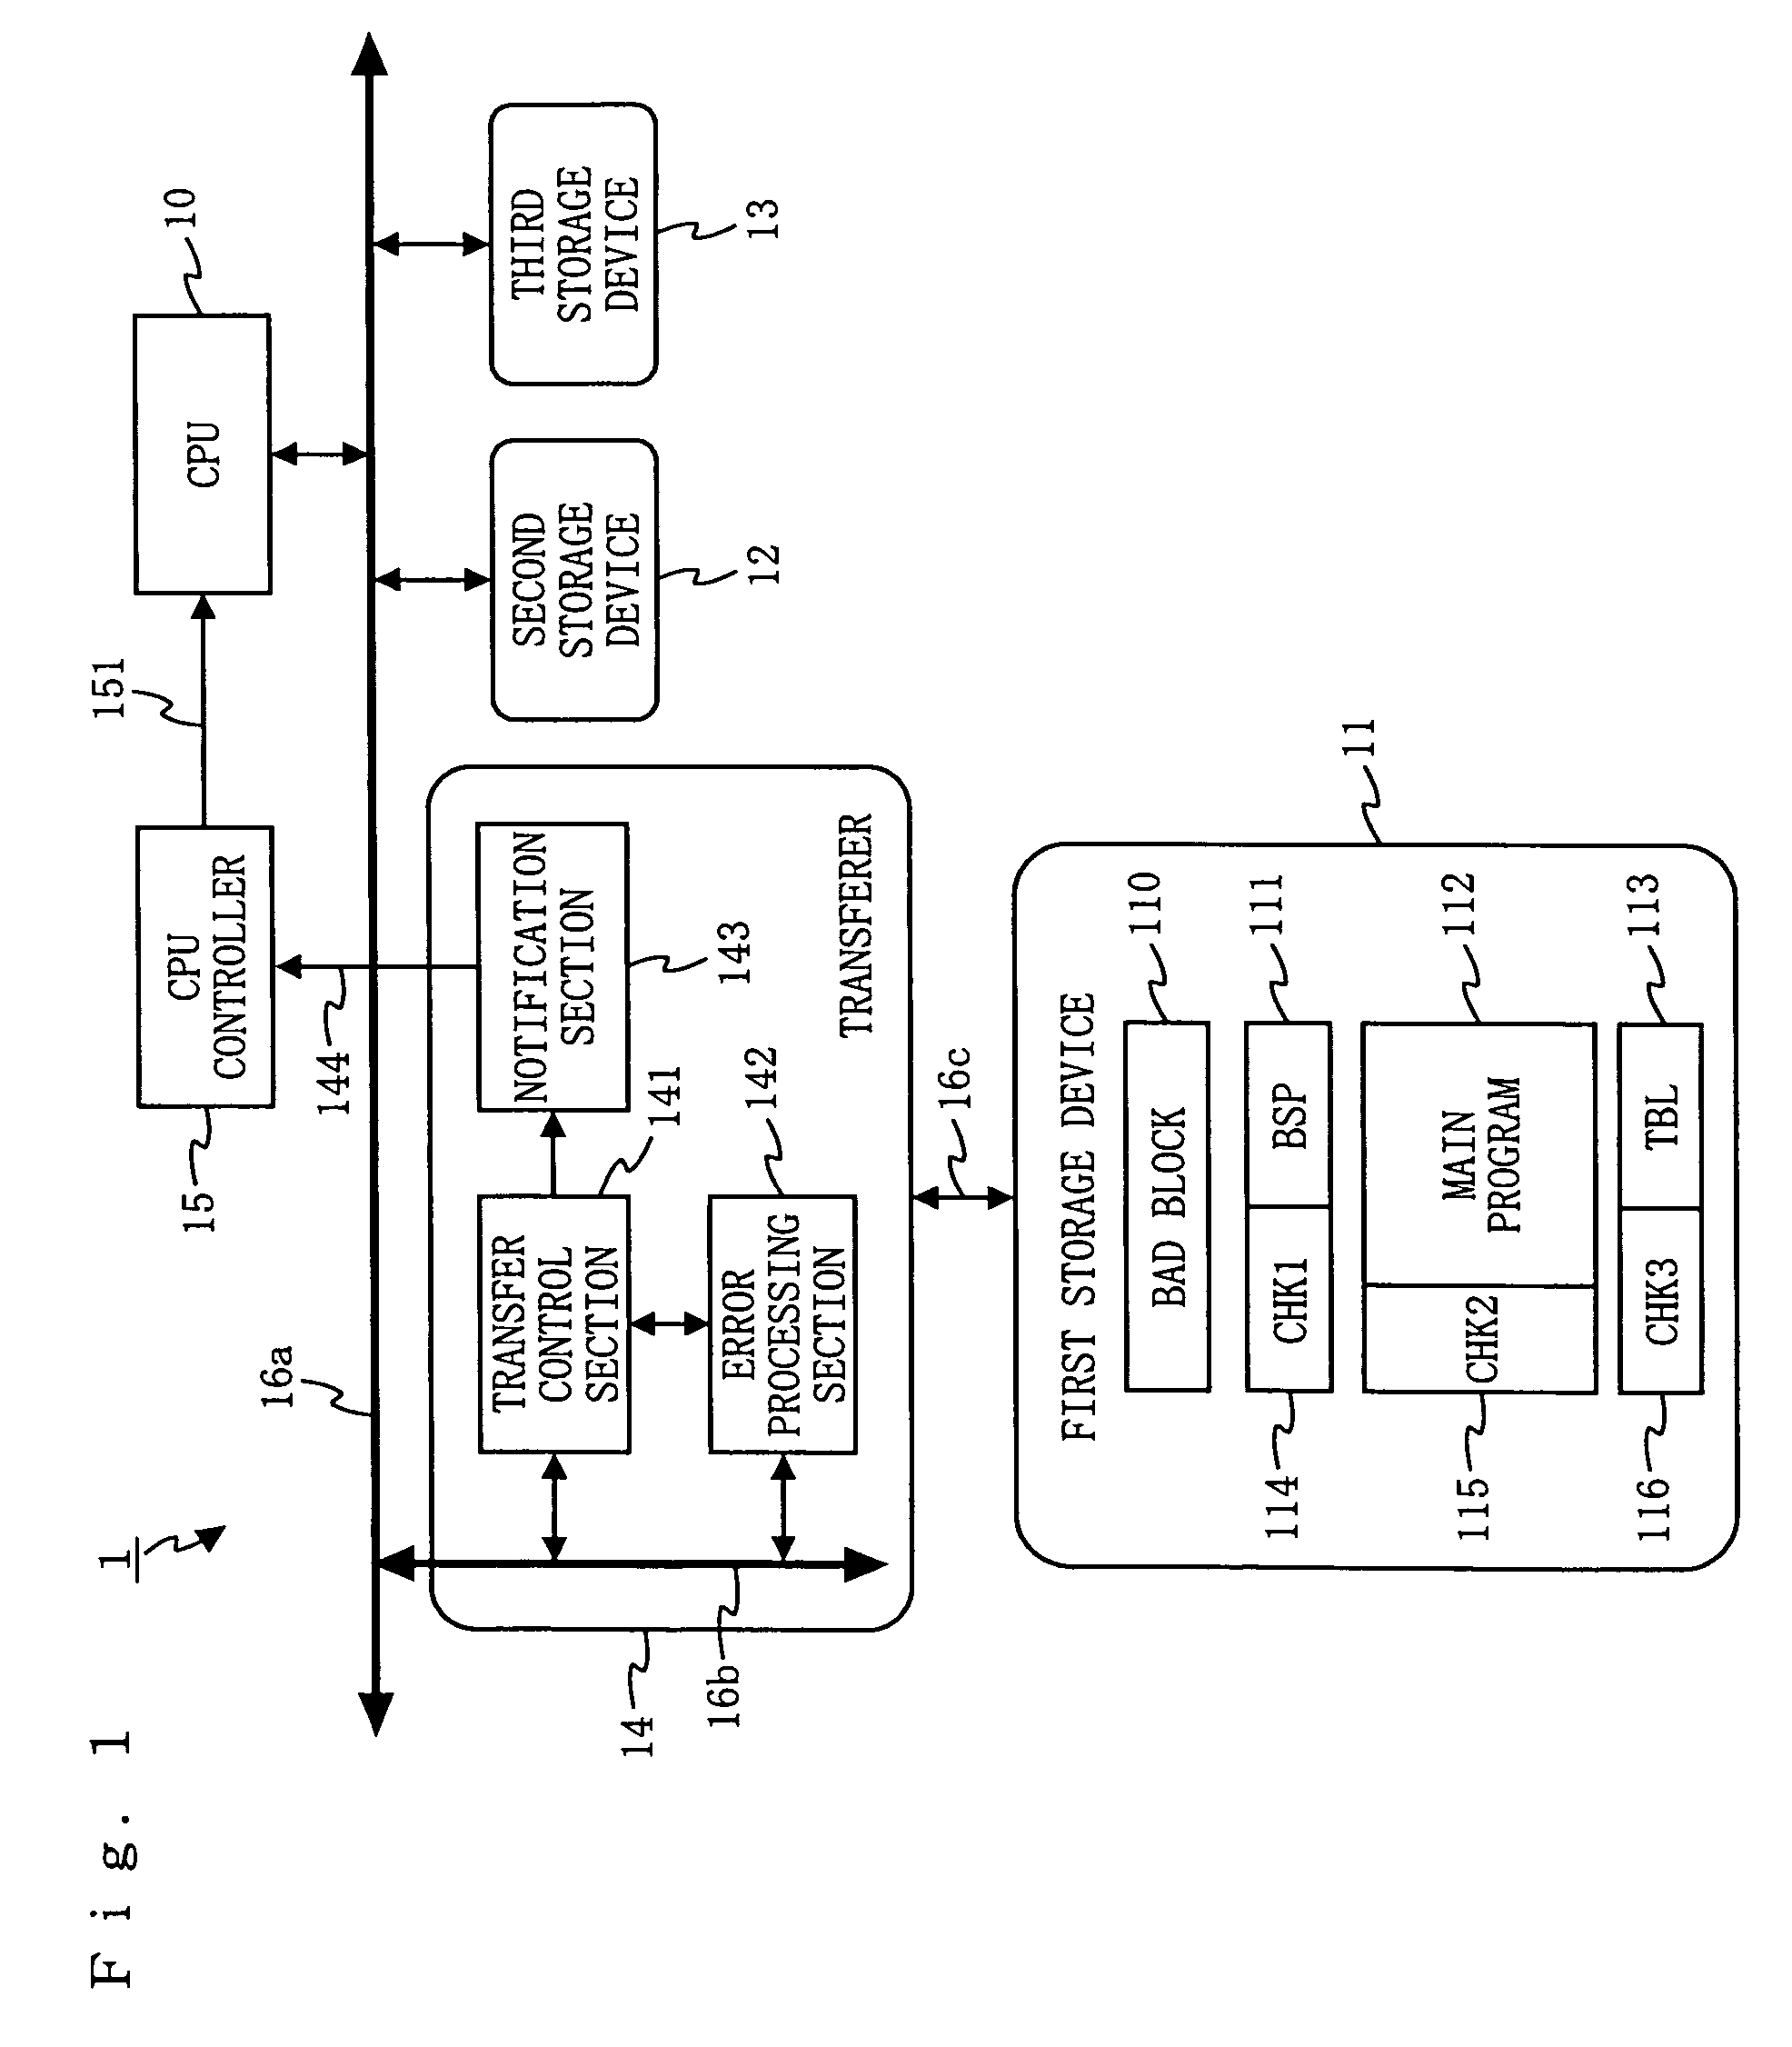 Information processing apparatus for performing a system boot by using programs stored in a non-voltile storage device